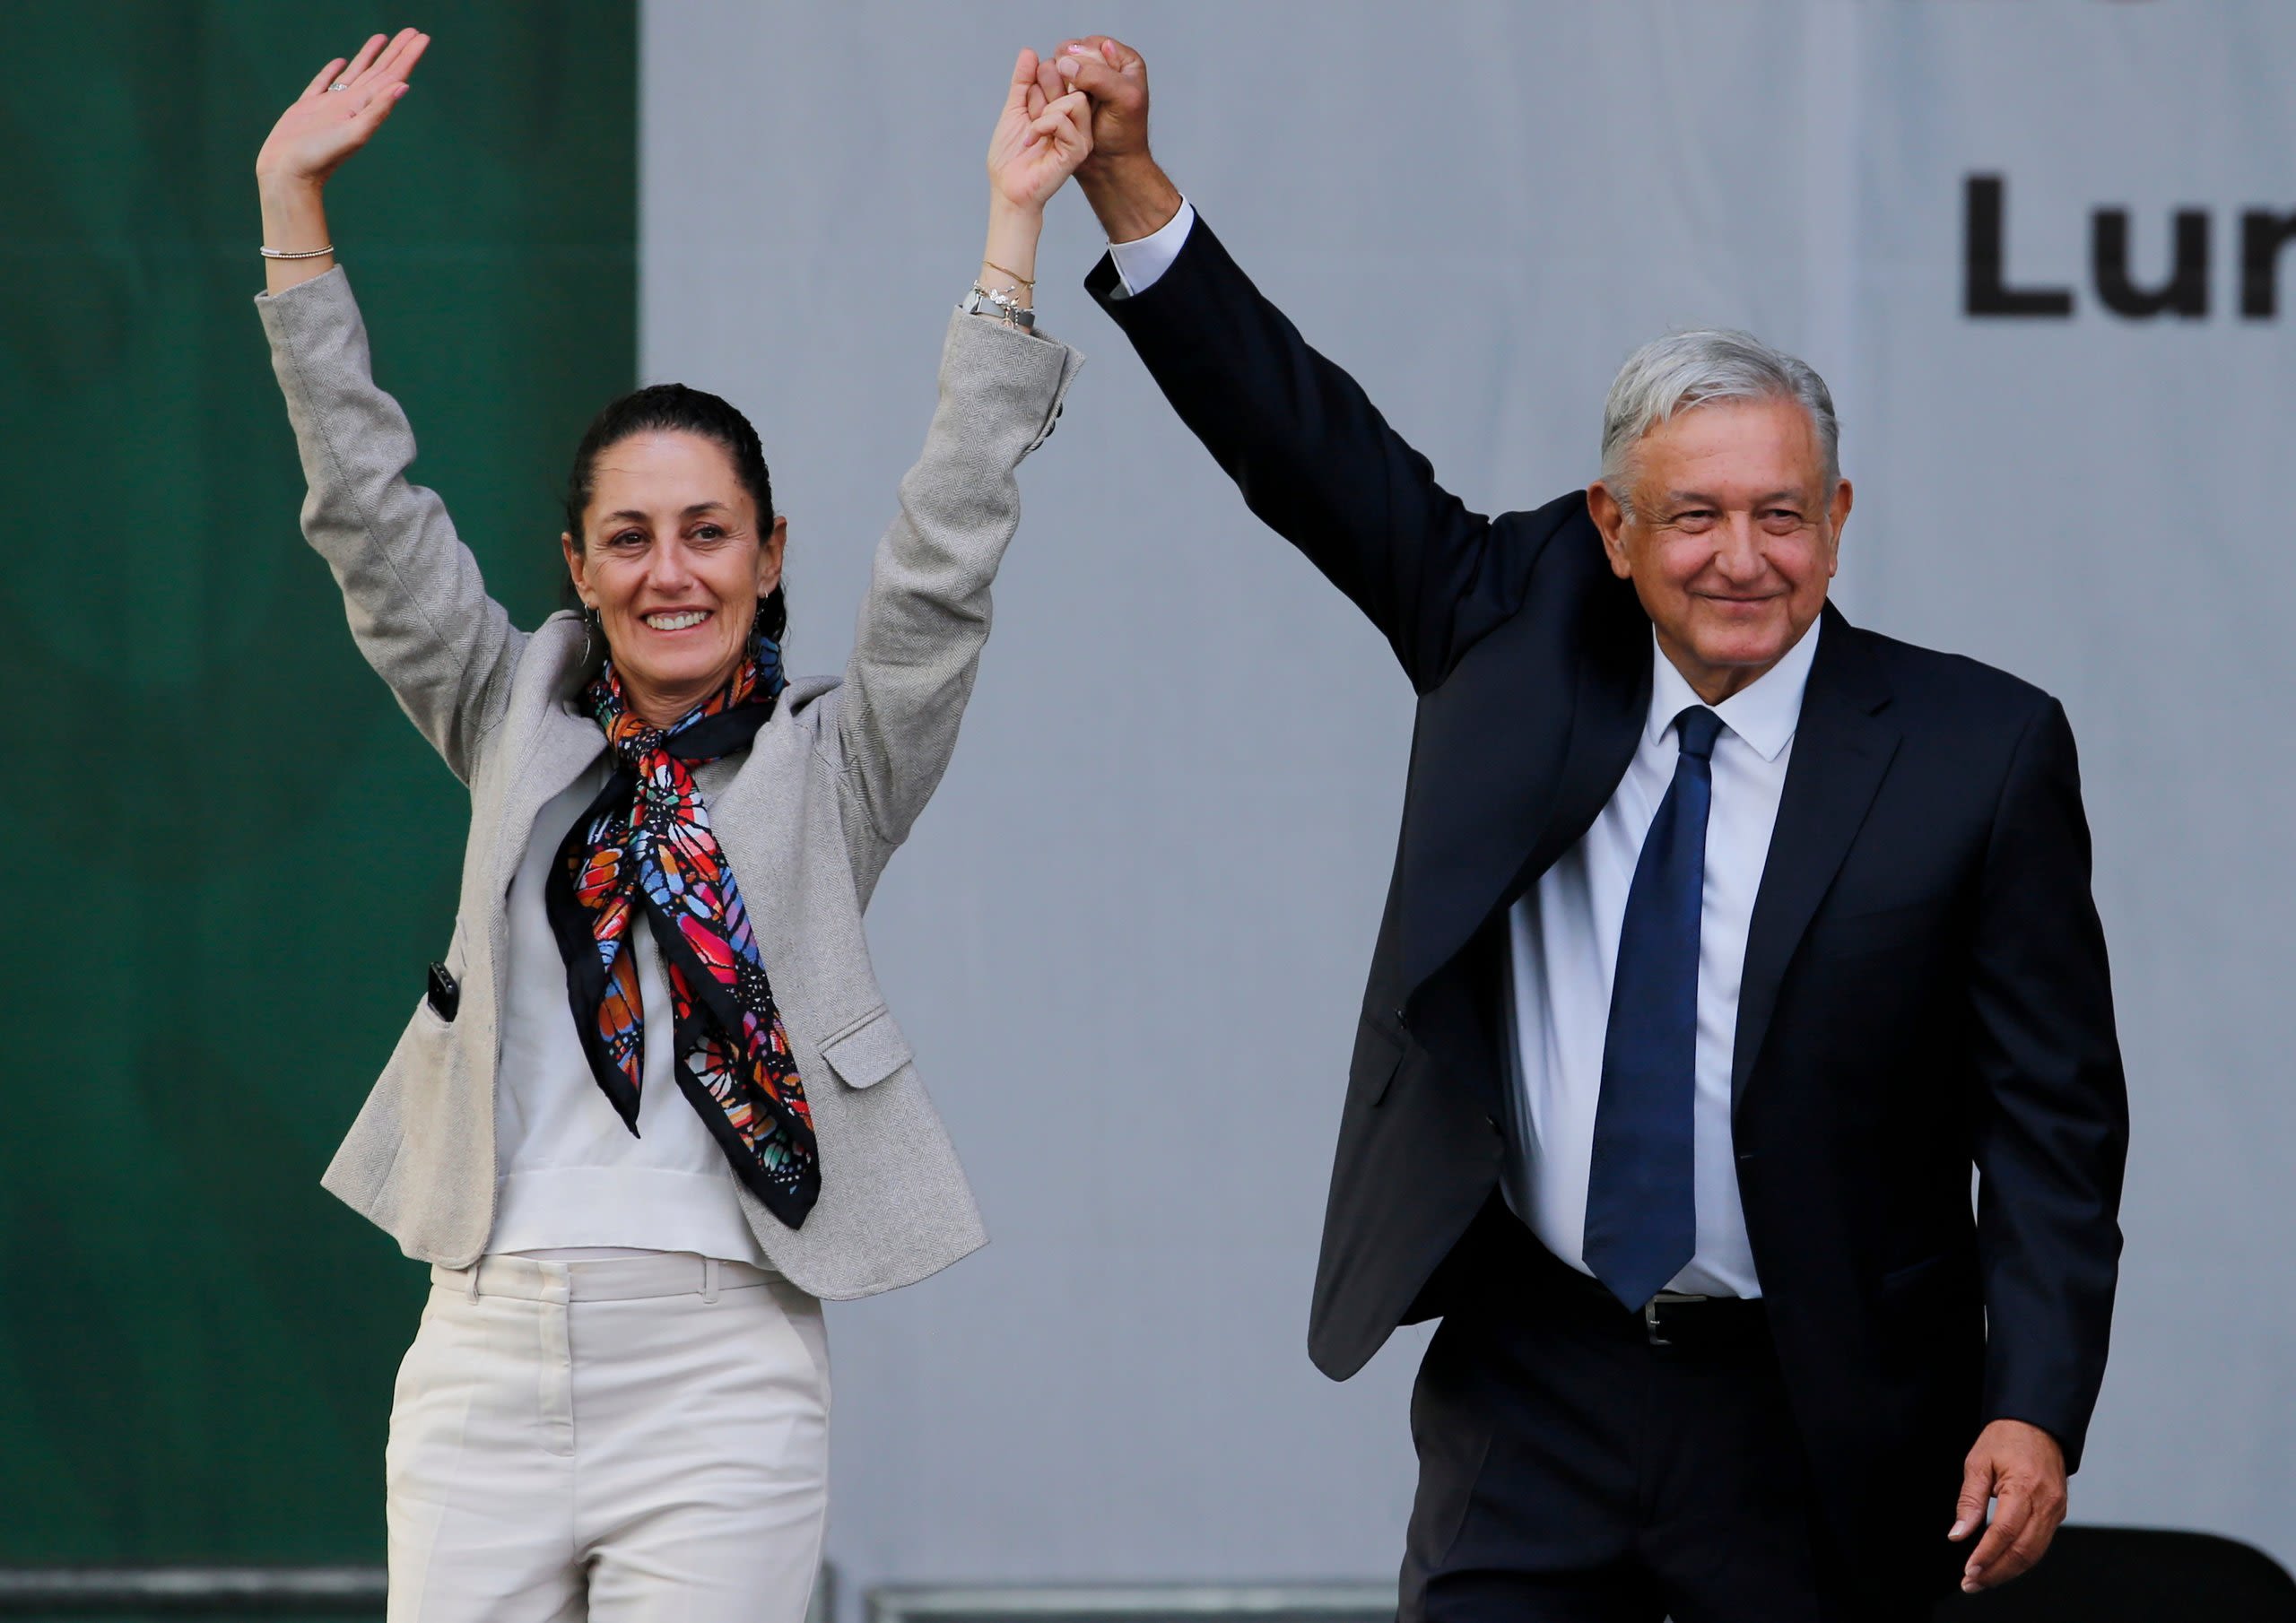 What can Mexico expect from a Sheinbaum presidency?